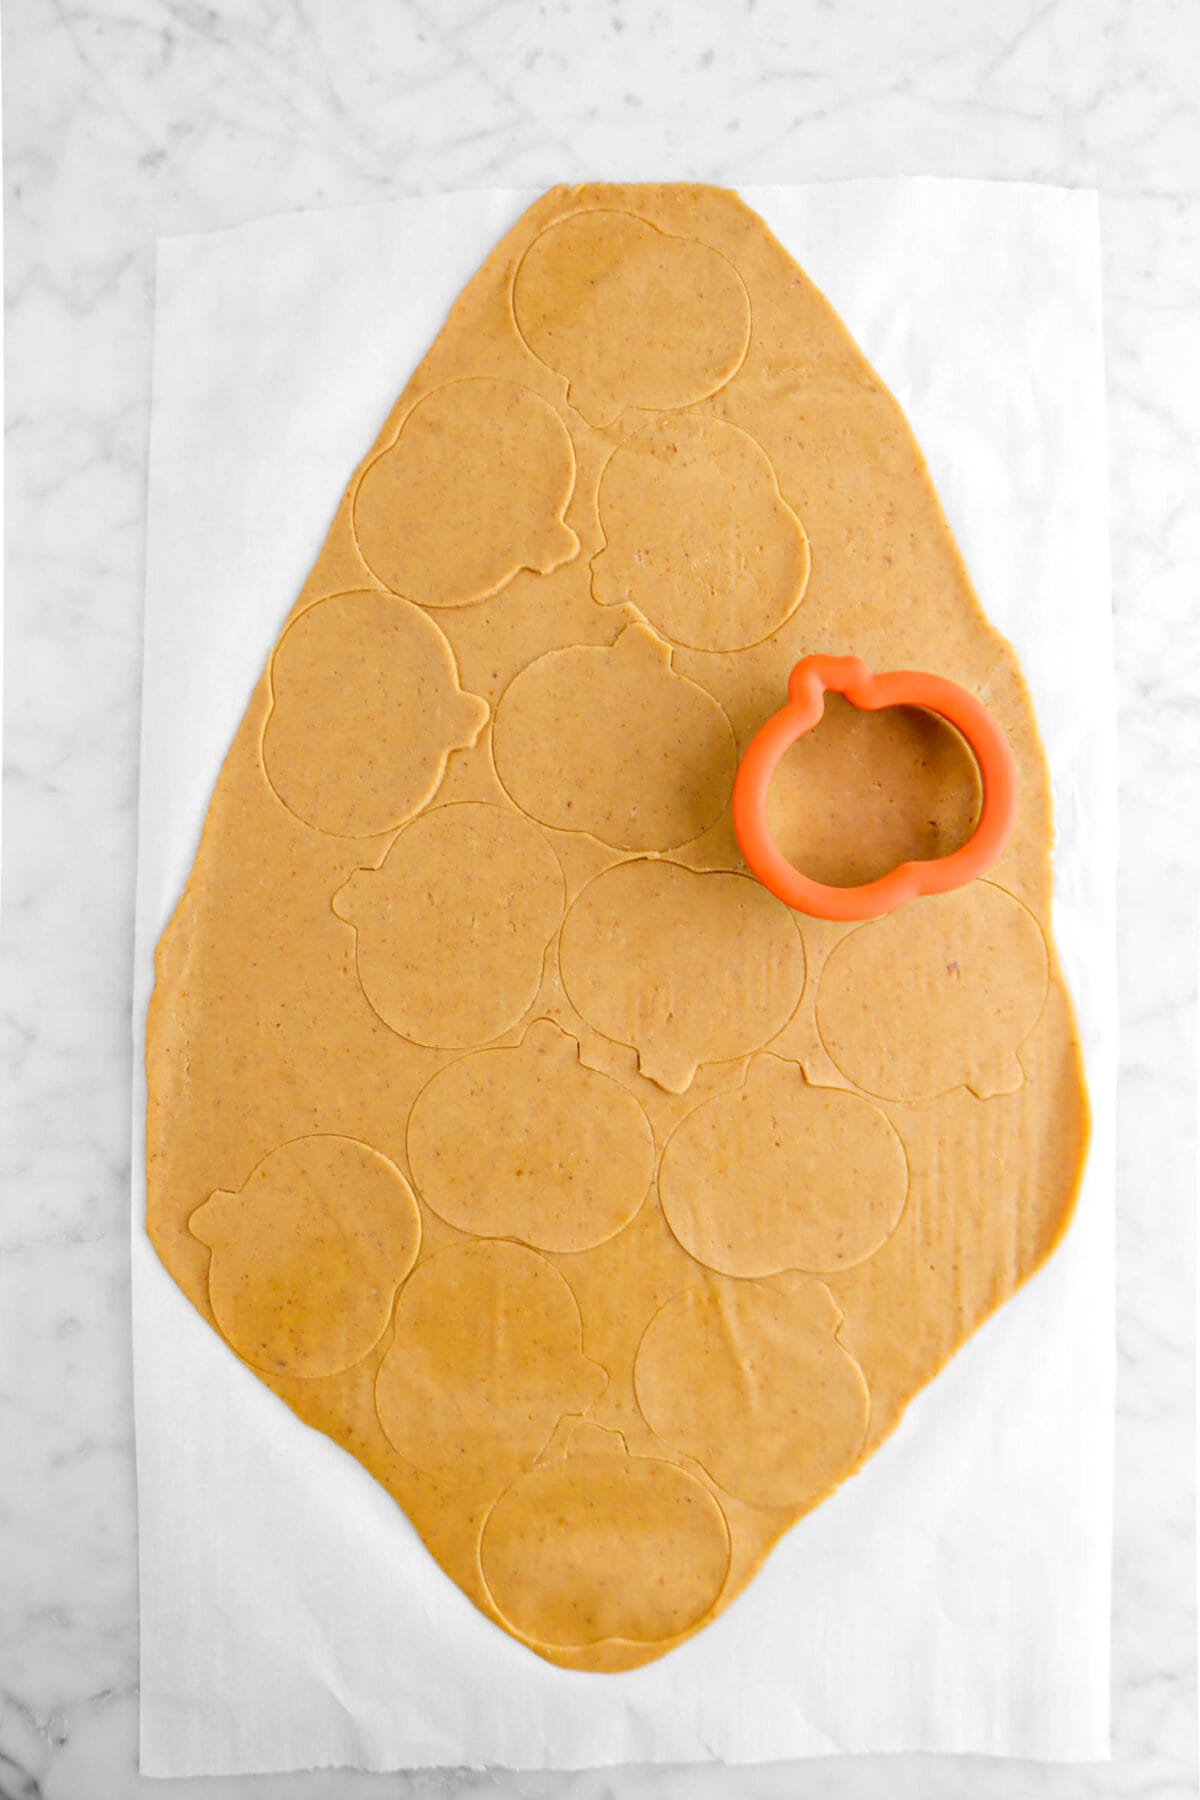 rolled out cookie dough with pumpkin shapes cut into the dough with pumpkin cutter on the cookie dough.